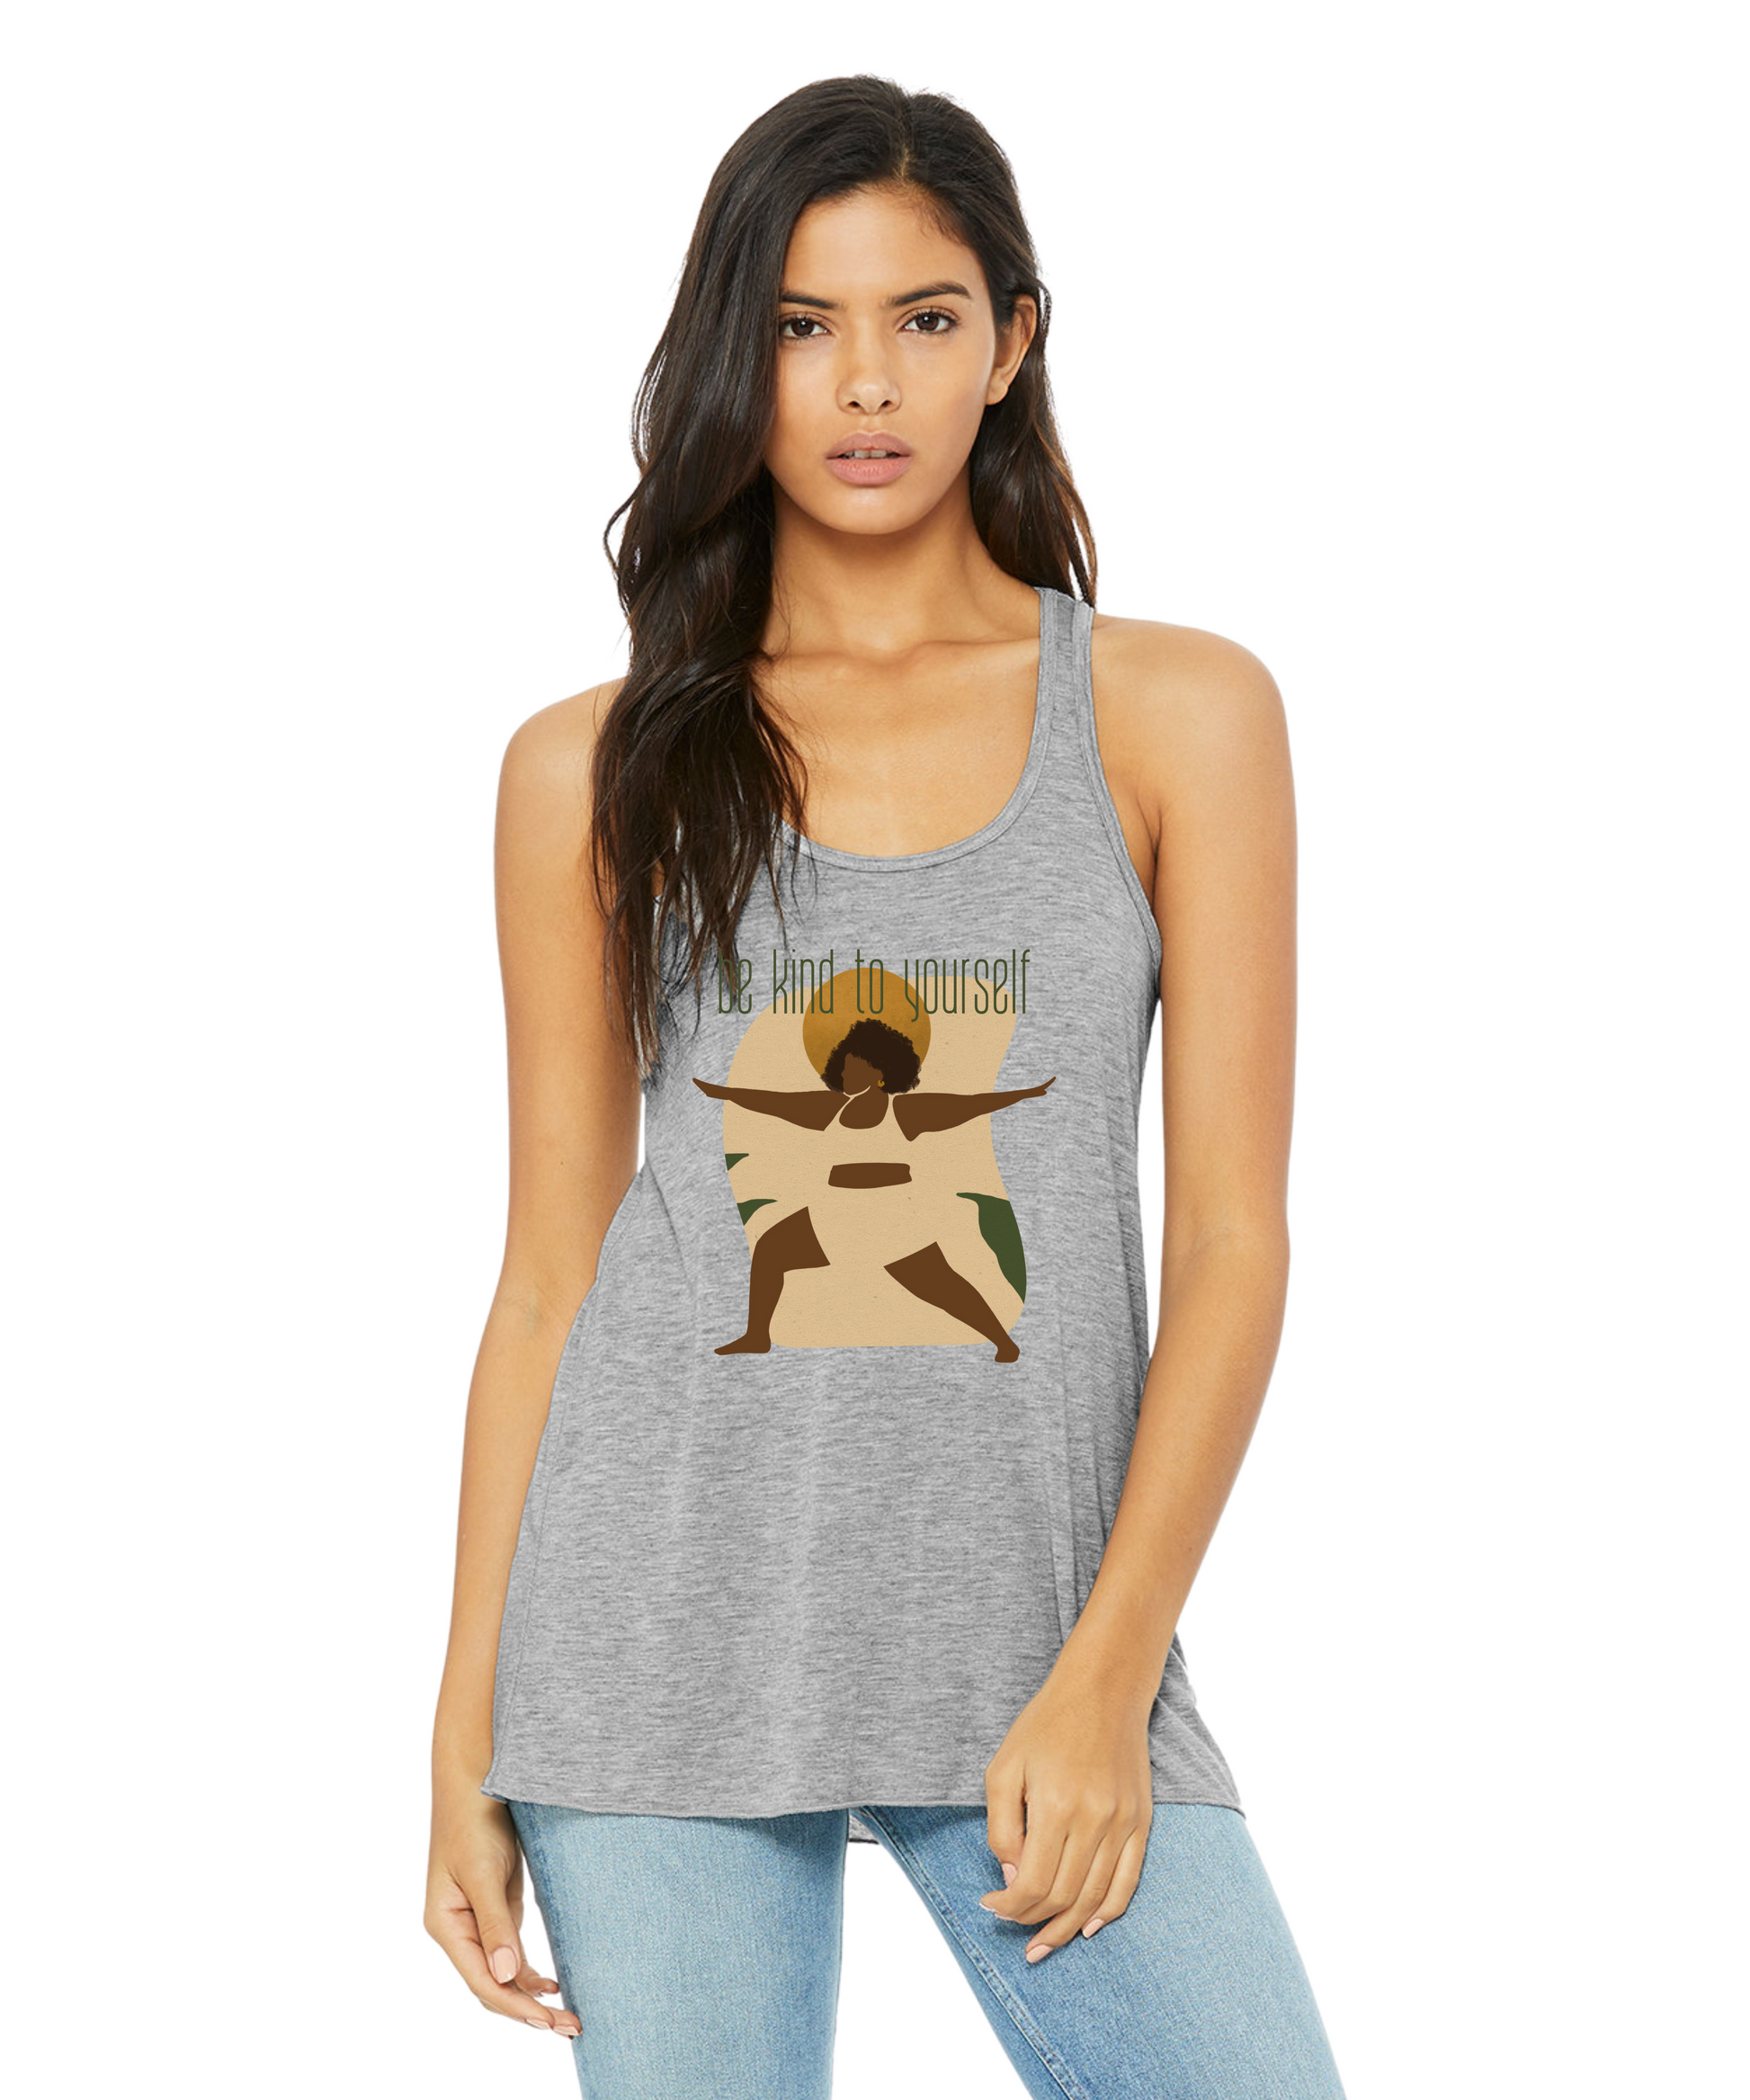 Be Kind to Yourself Flowy Yoga Tank Top